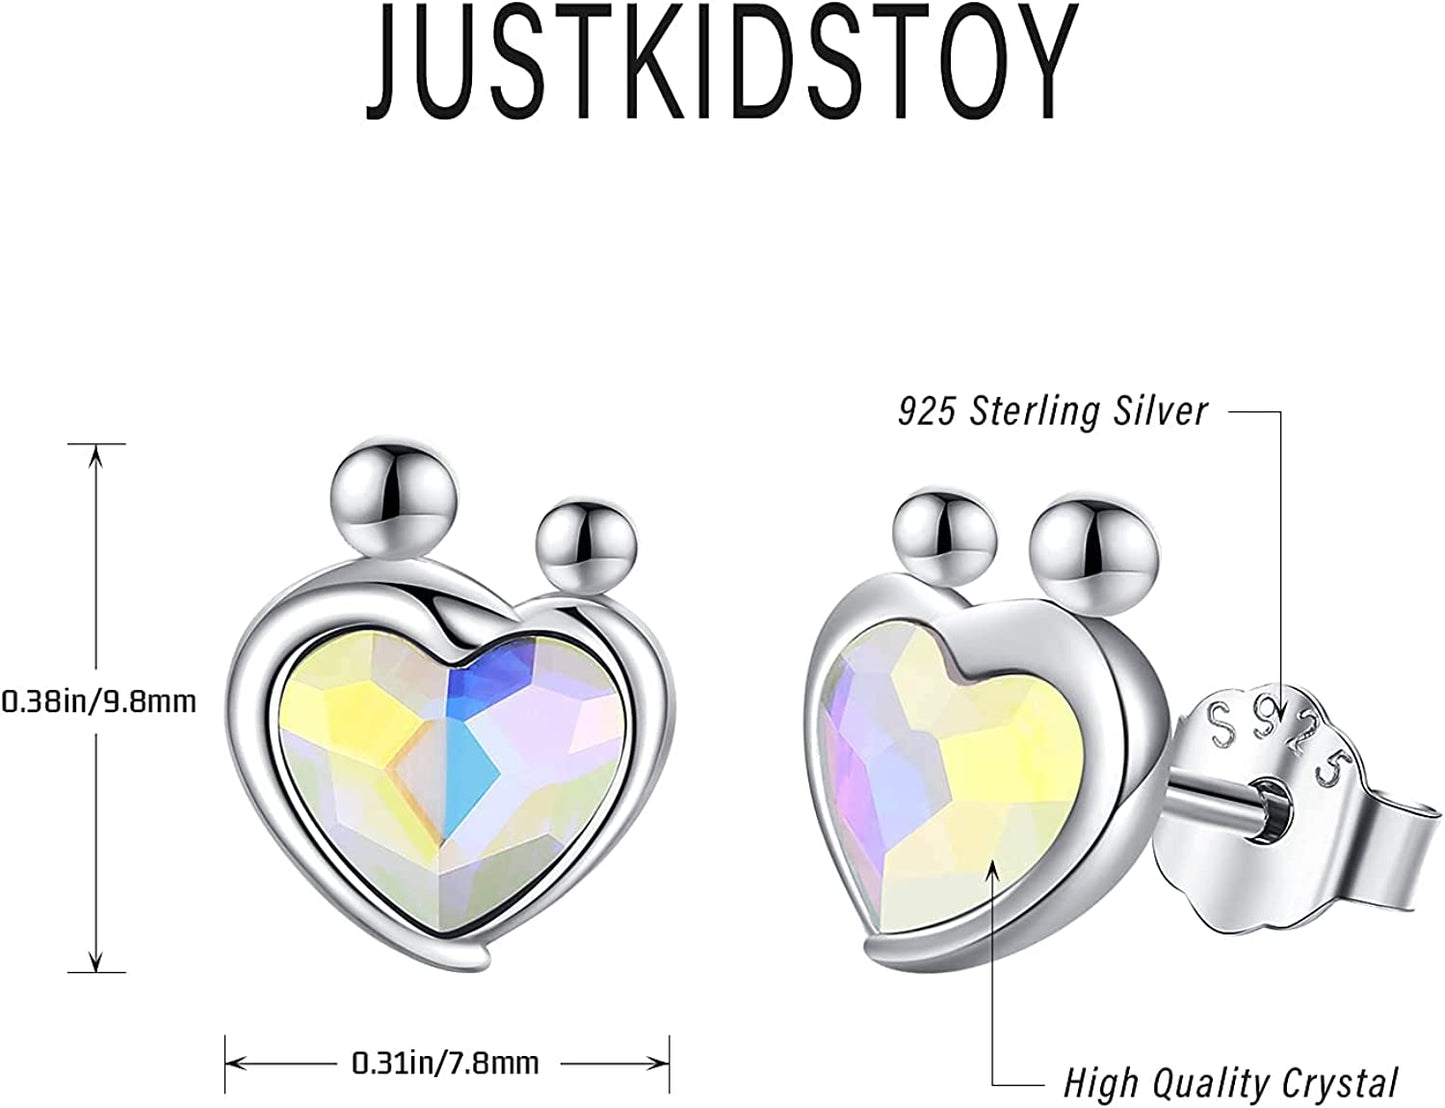 Hypoallergenic Earrings 925 Sterling Silver Heart Stud Earrings Valentine's Day Mother's Day Birthday Christmas Gifts for Girlfriend Mother Daughter Wife